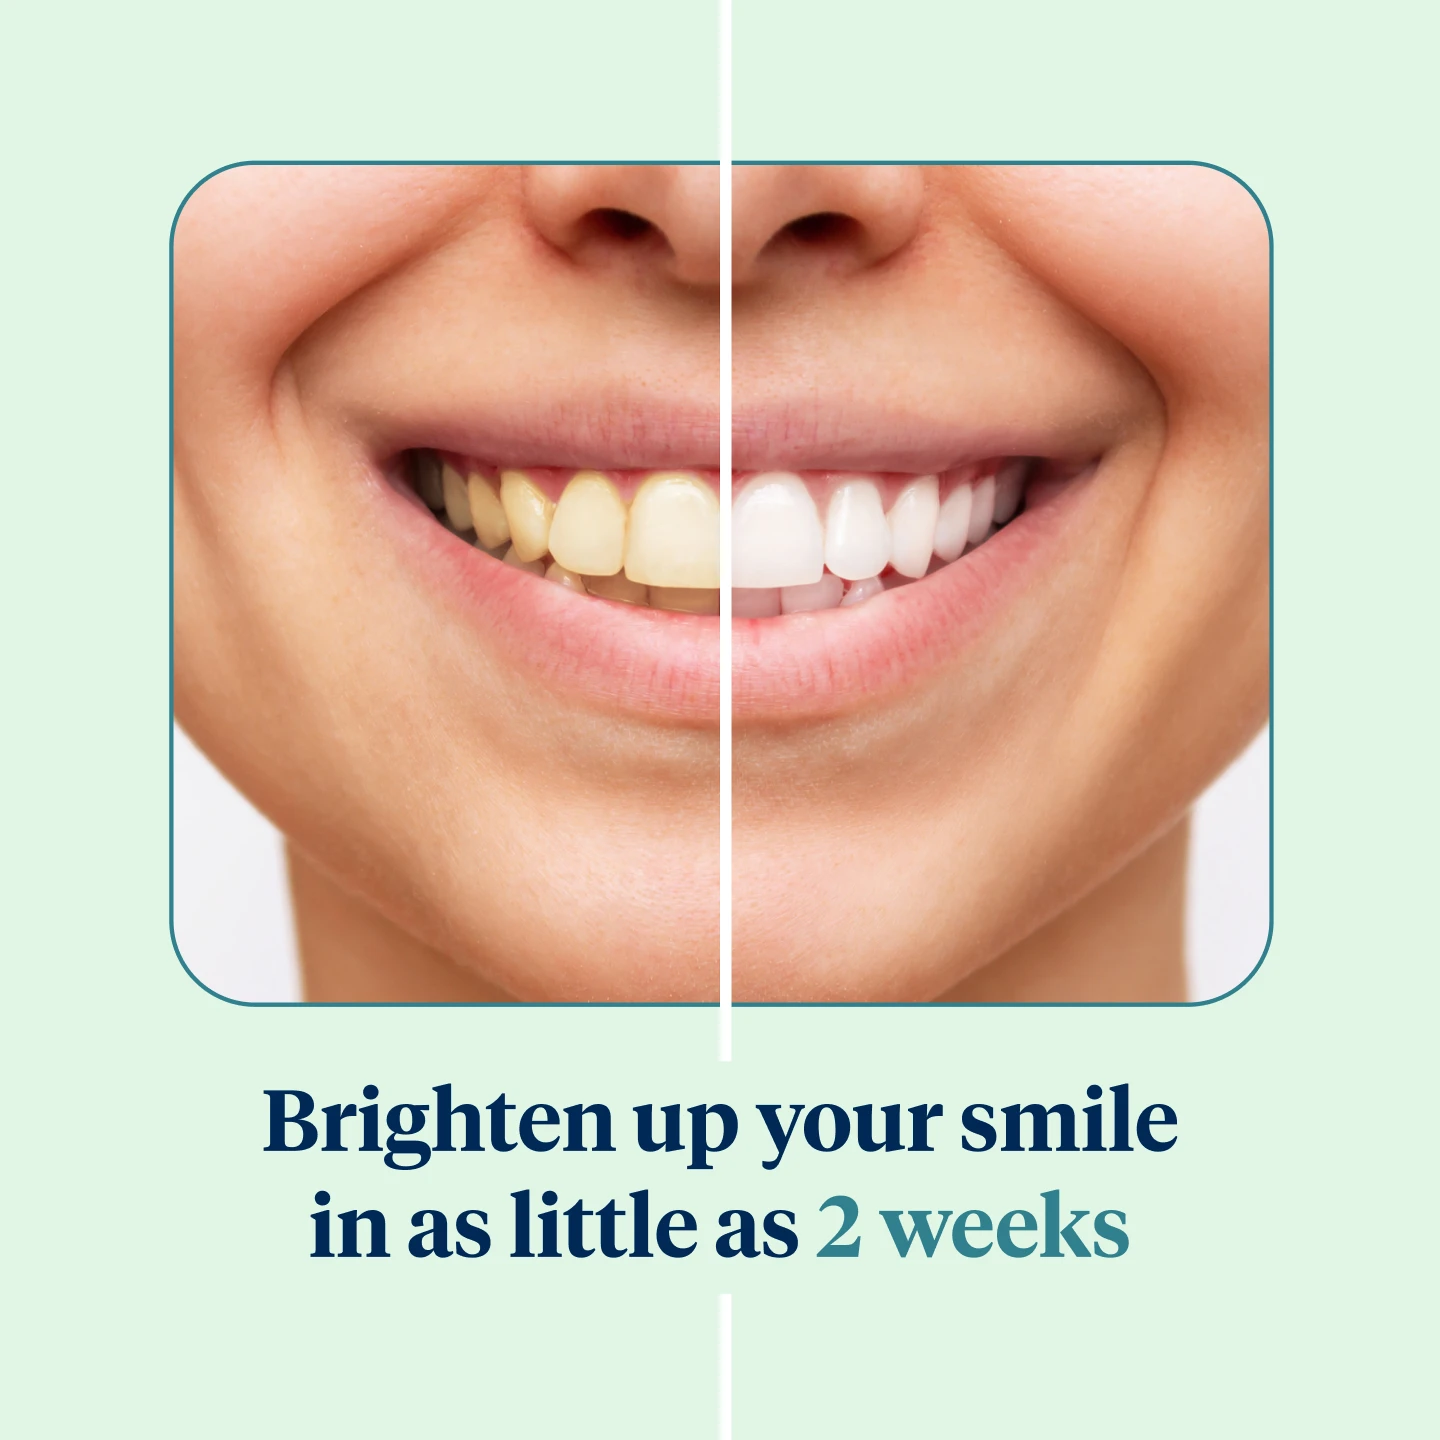 Brighten up your smile in as little as 2 weeks. 